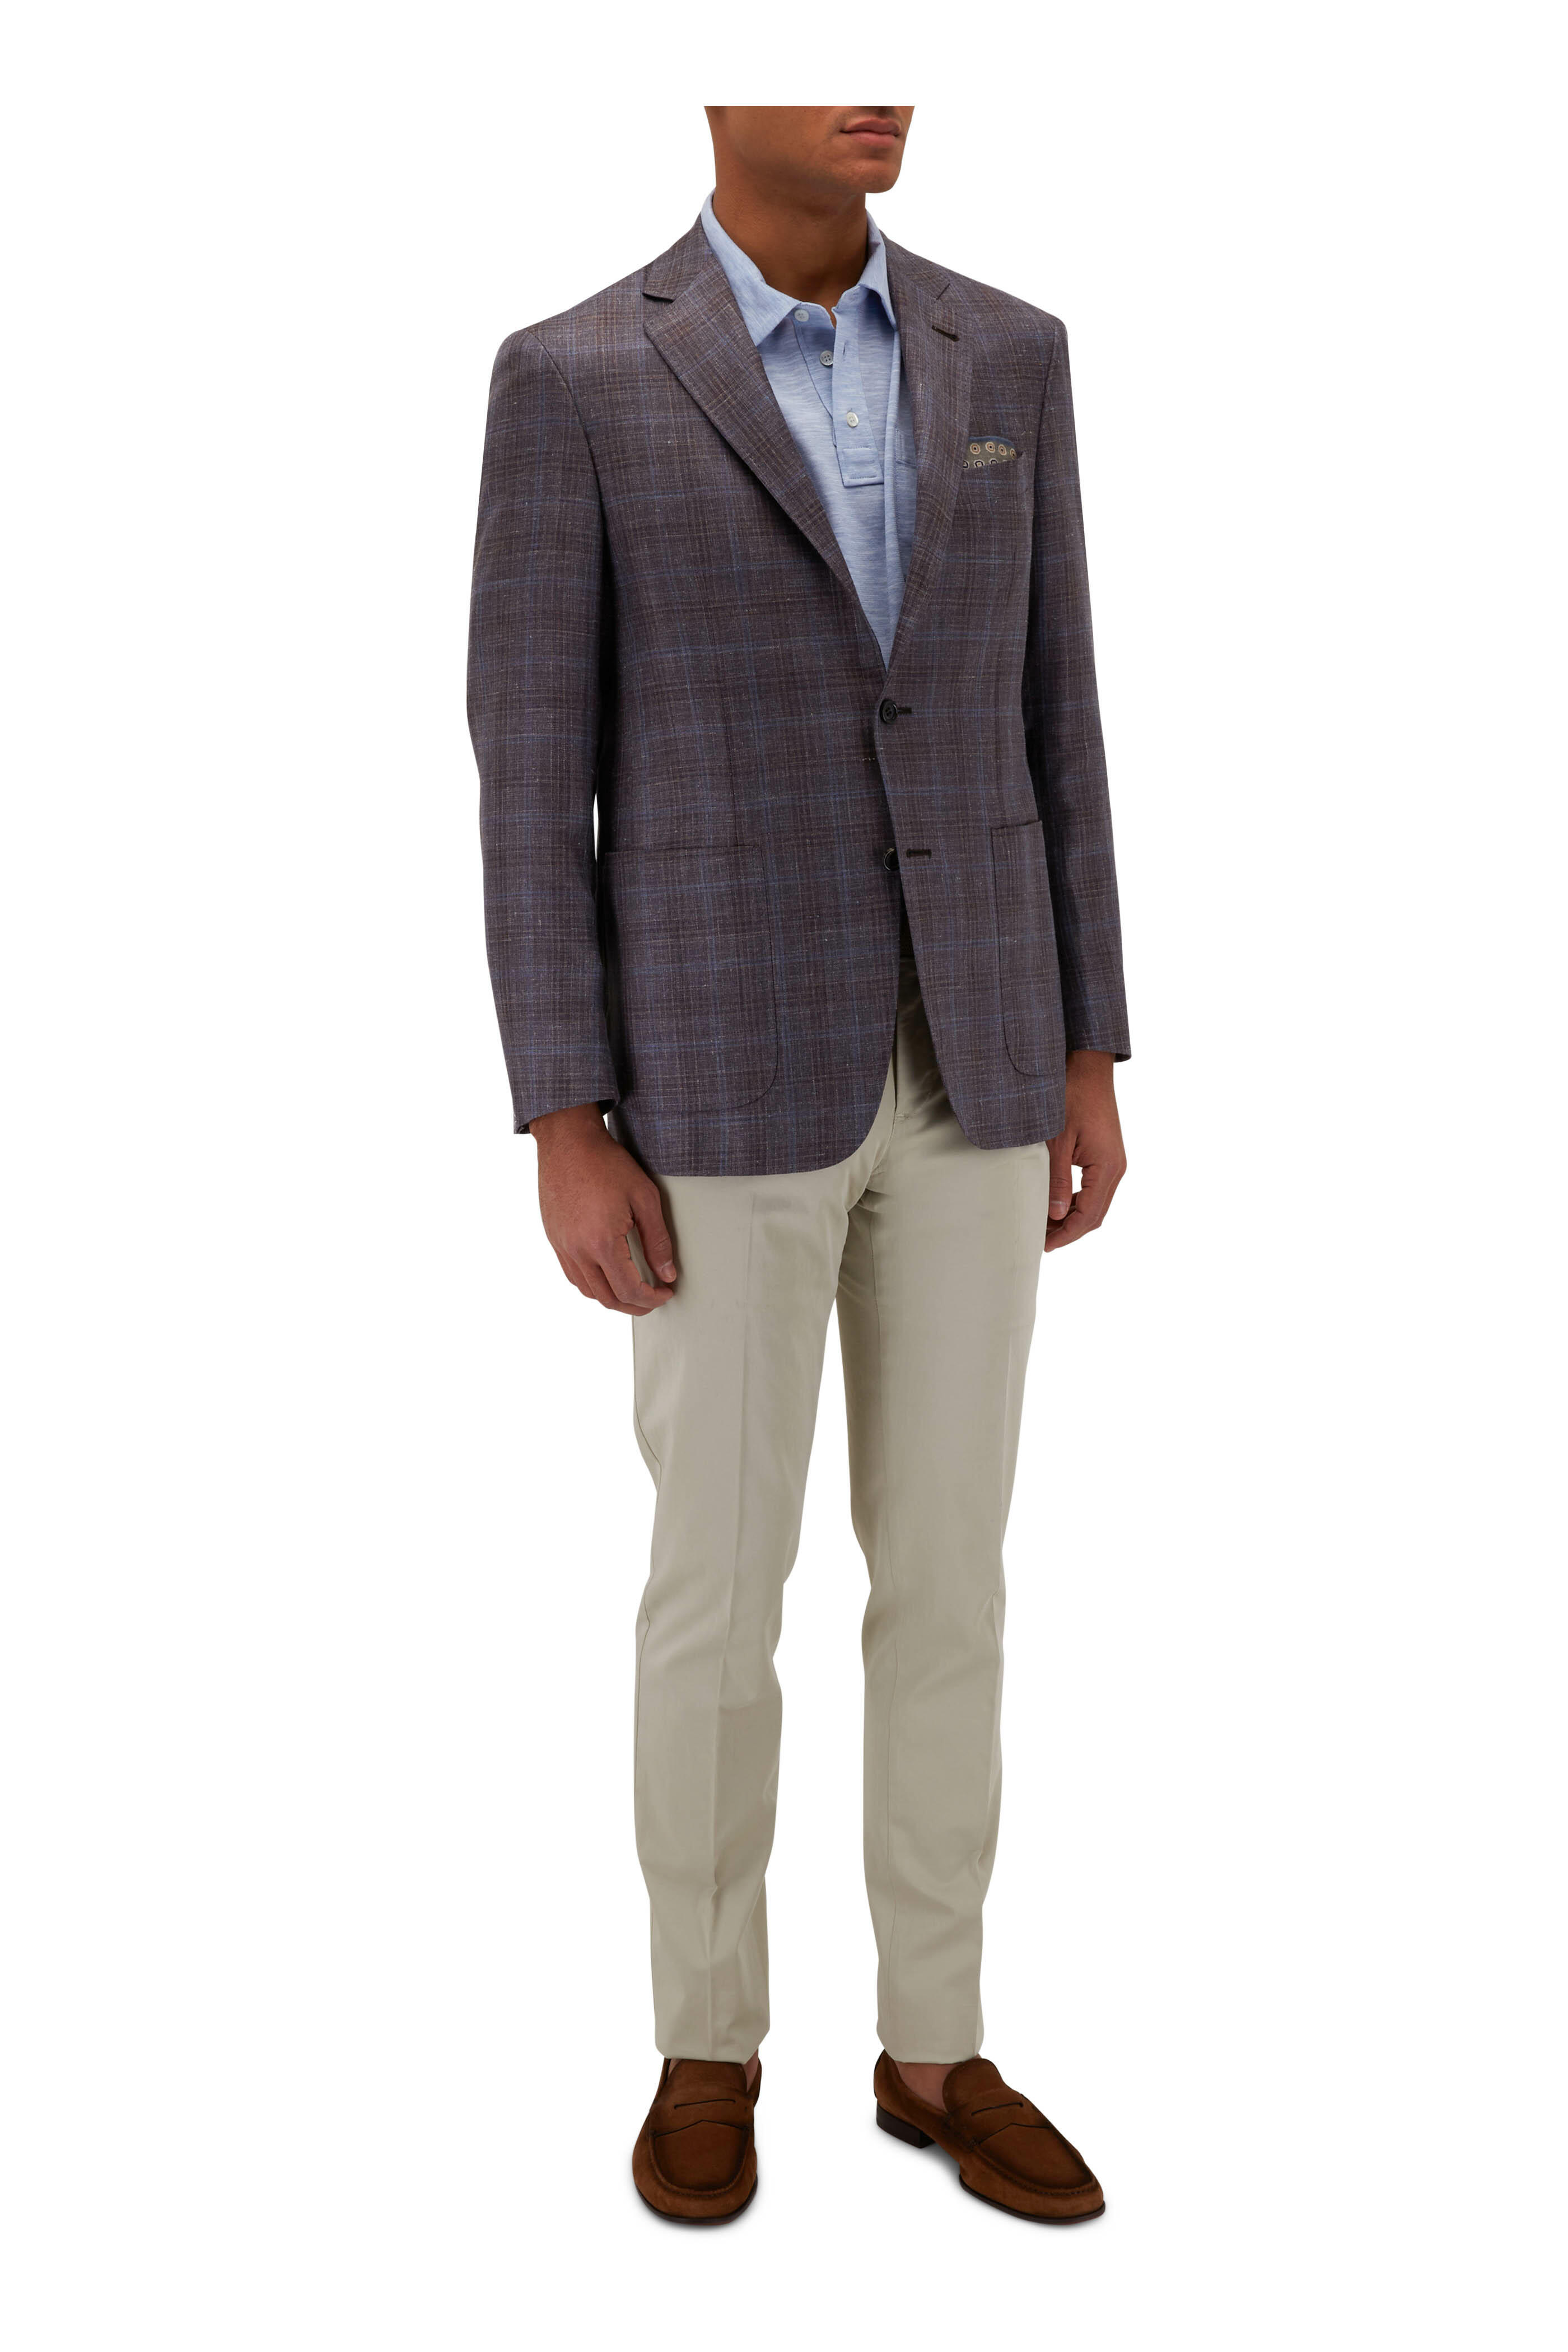 Canali - Brown, Gray & Blue Plaid Sportcoat | Mitchell Stores